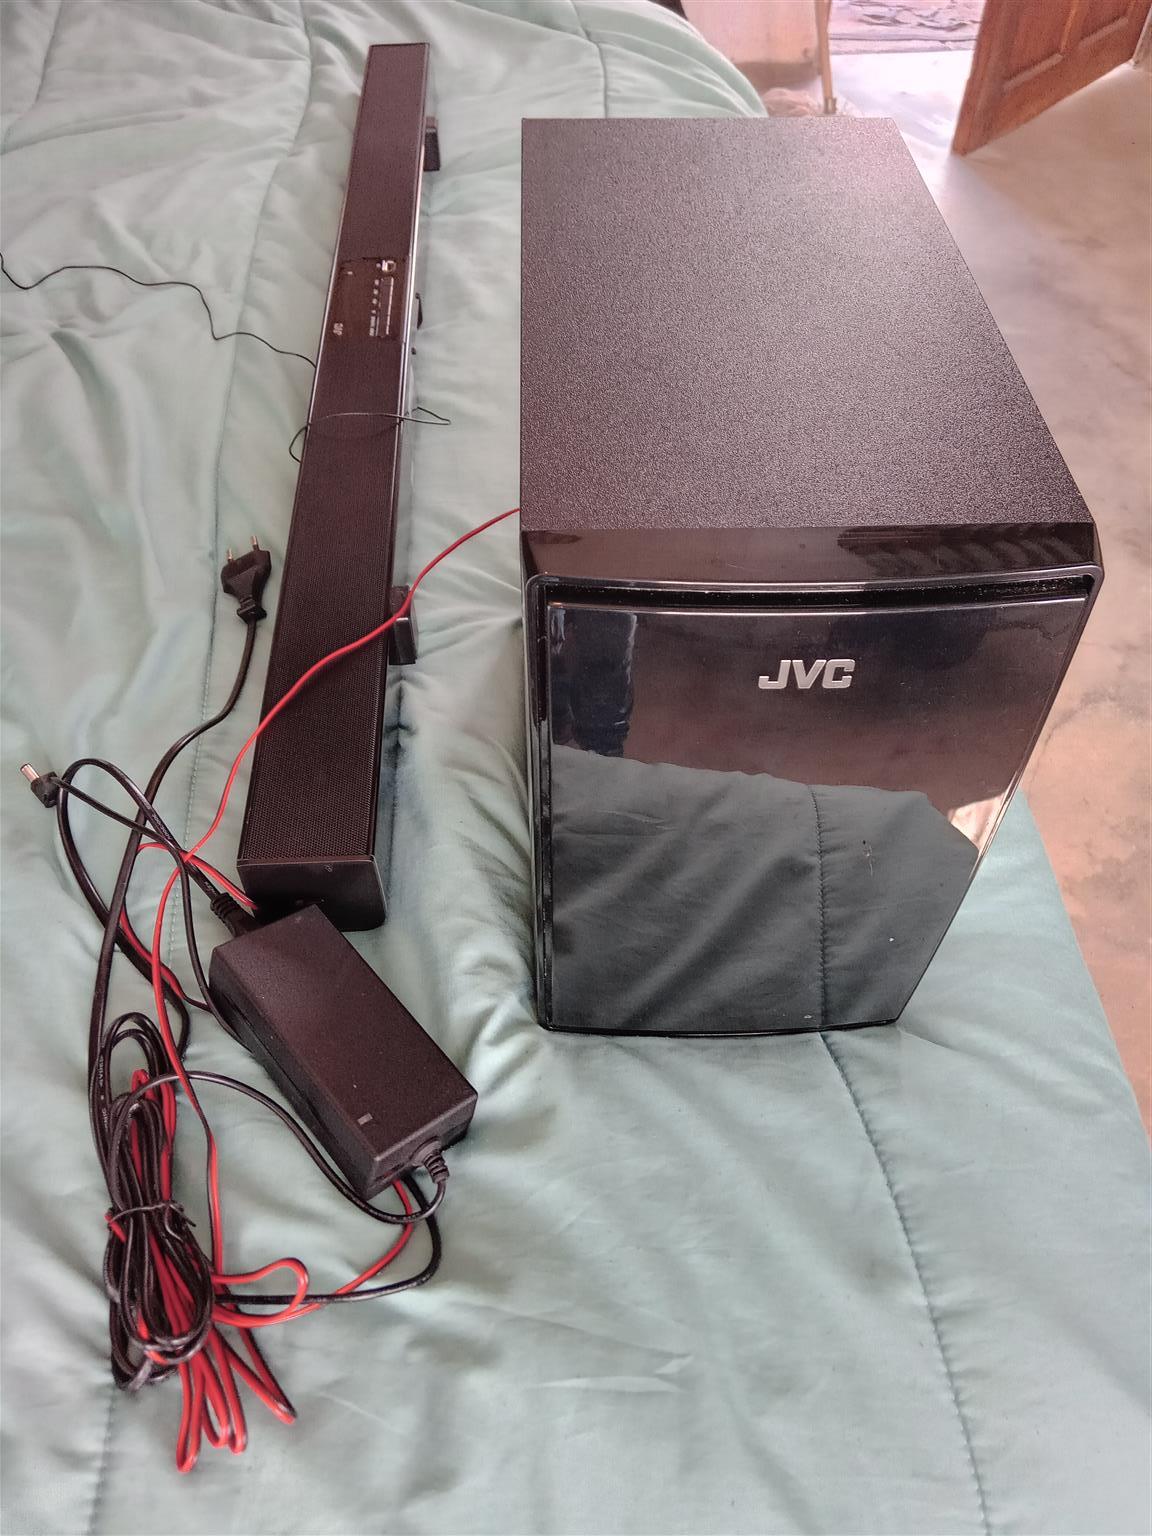 JVC sound bar, a month old very good condition 